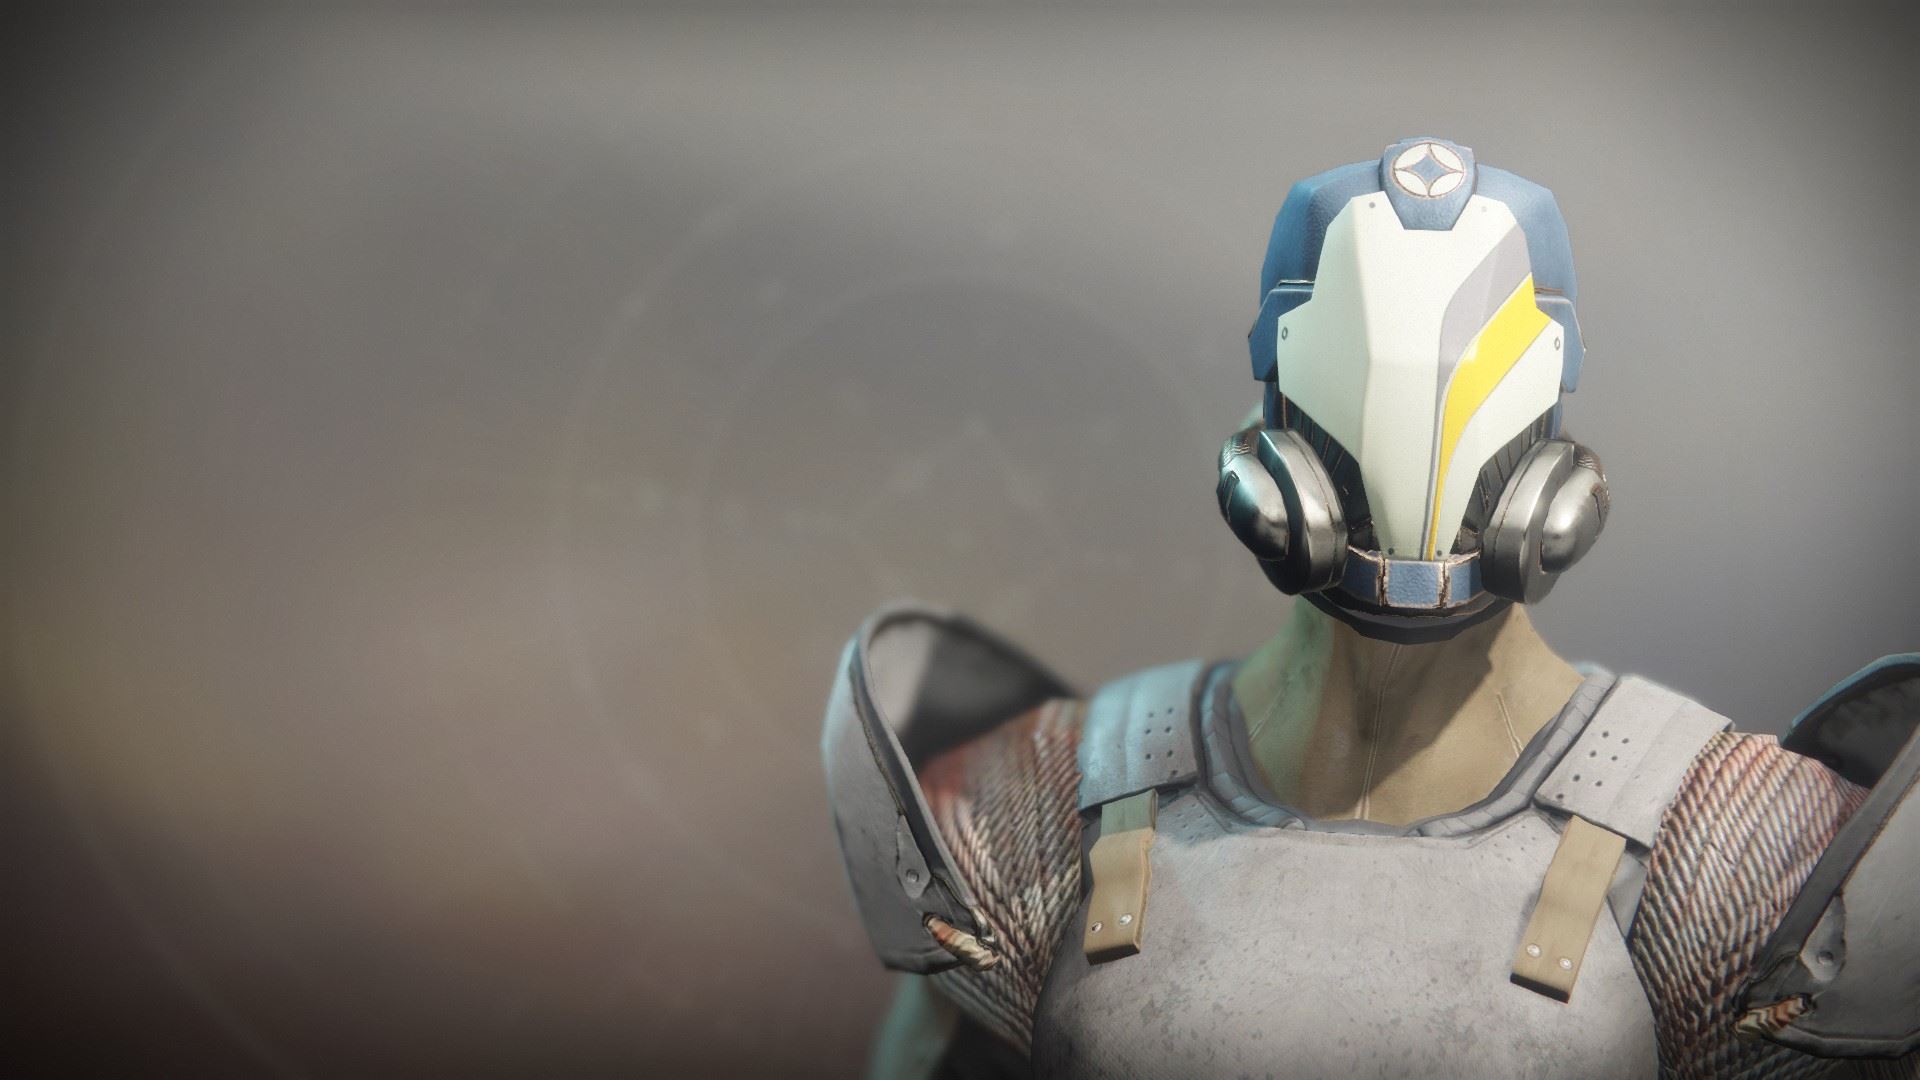 An in-game render of the BrayTech Sn0Helm.